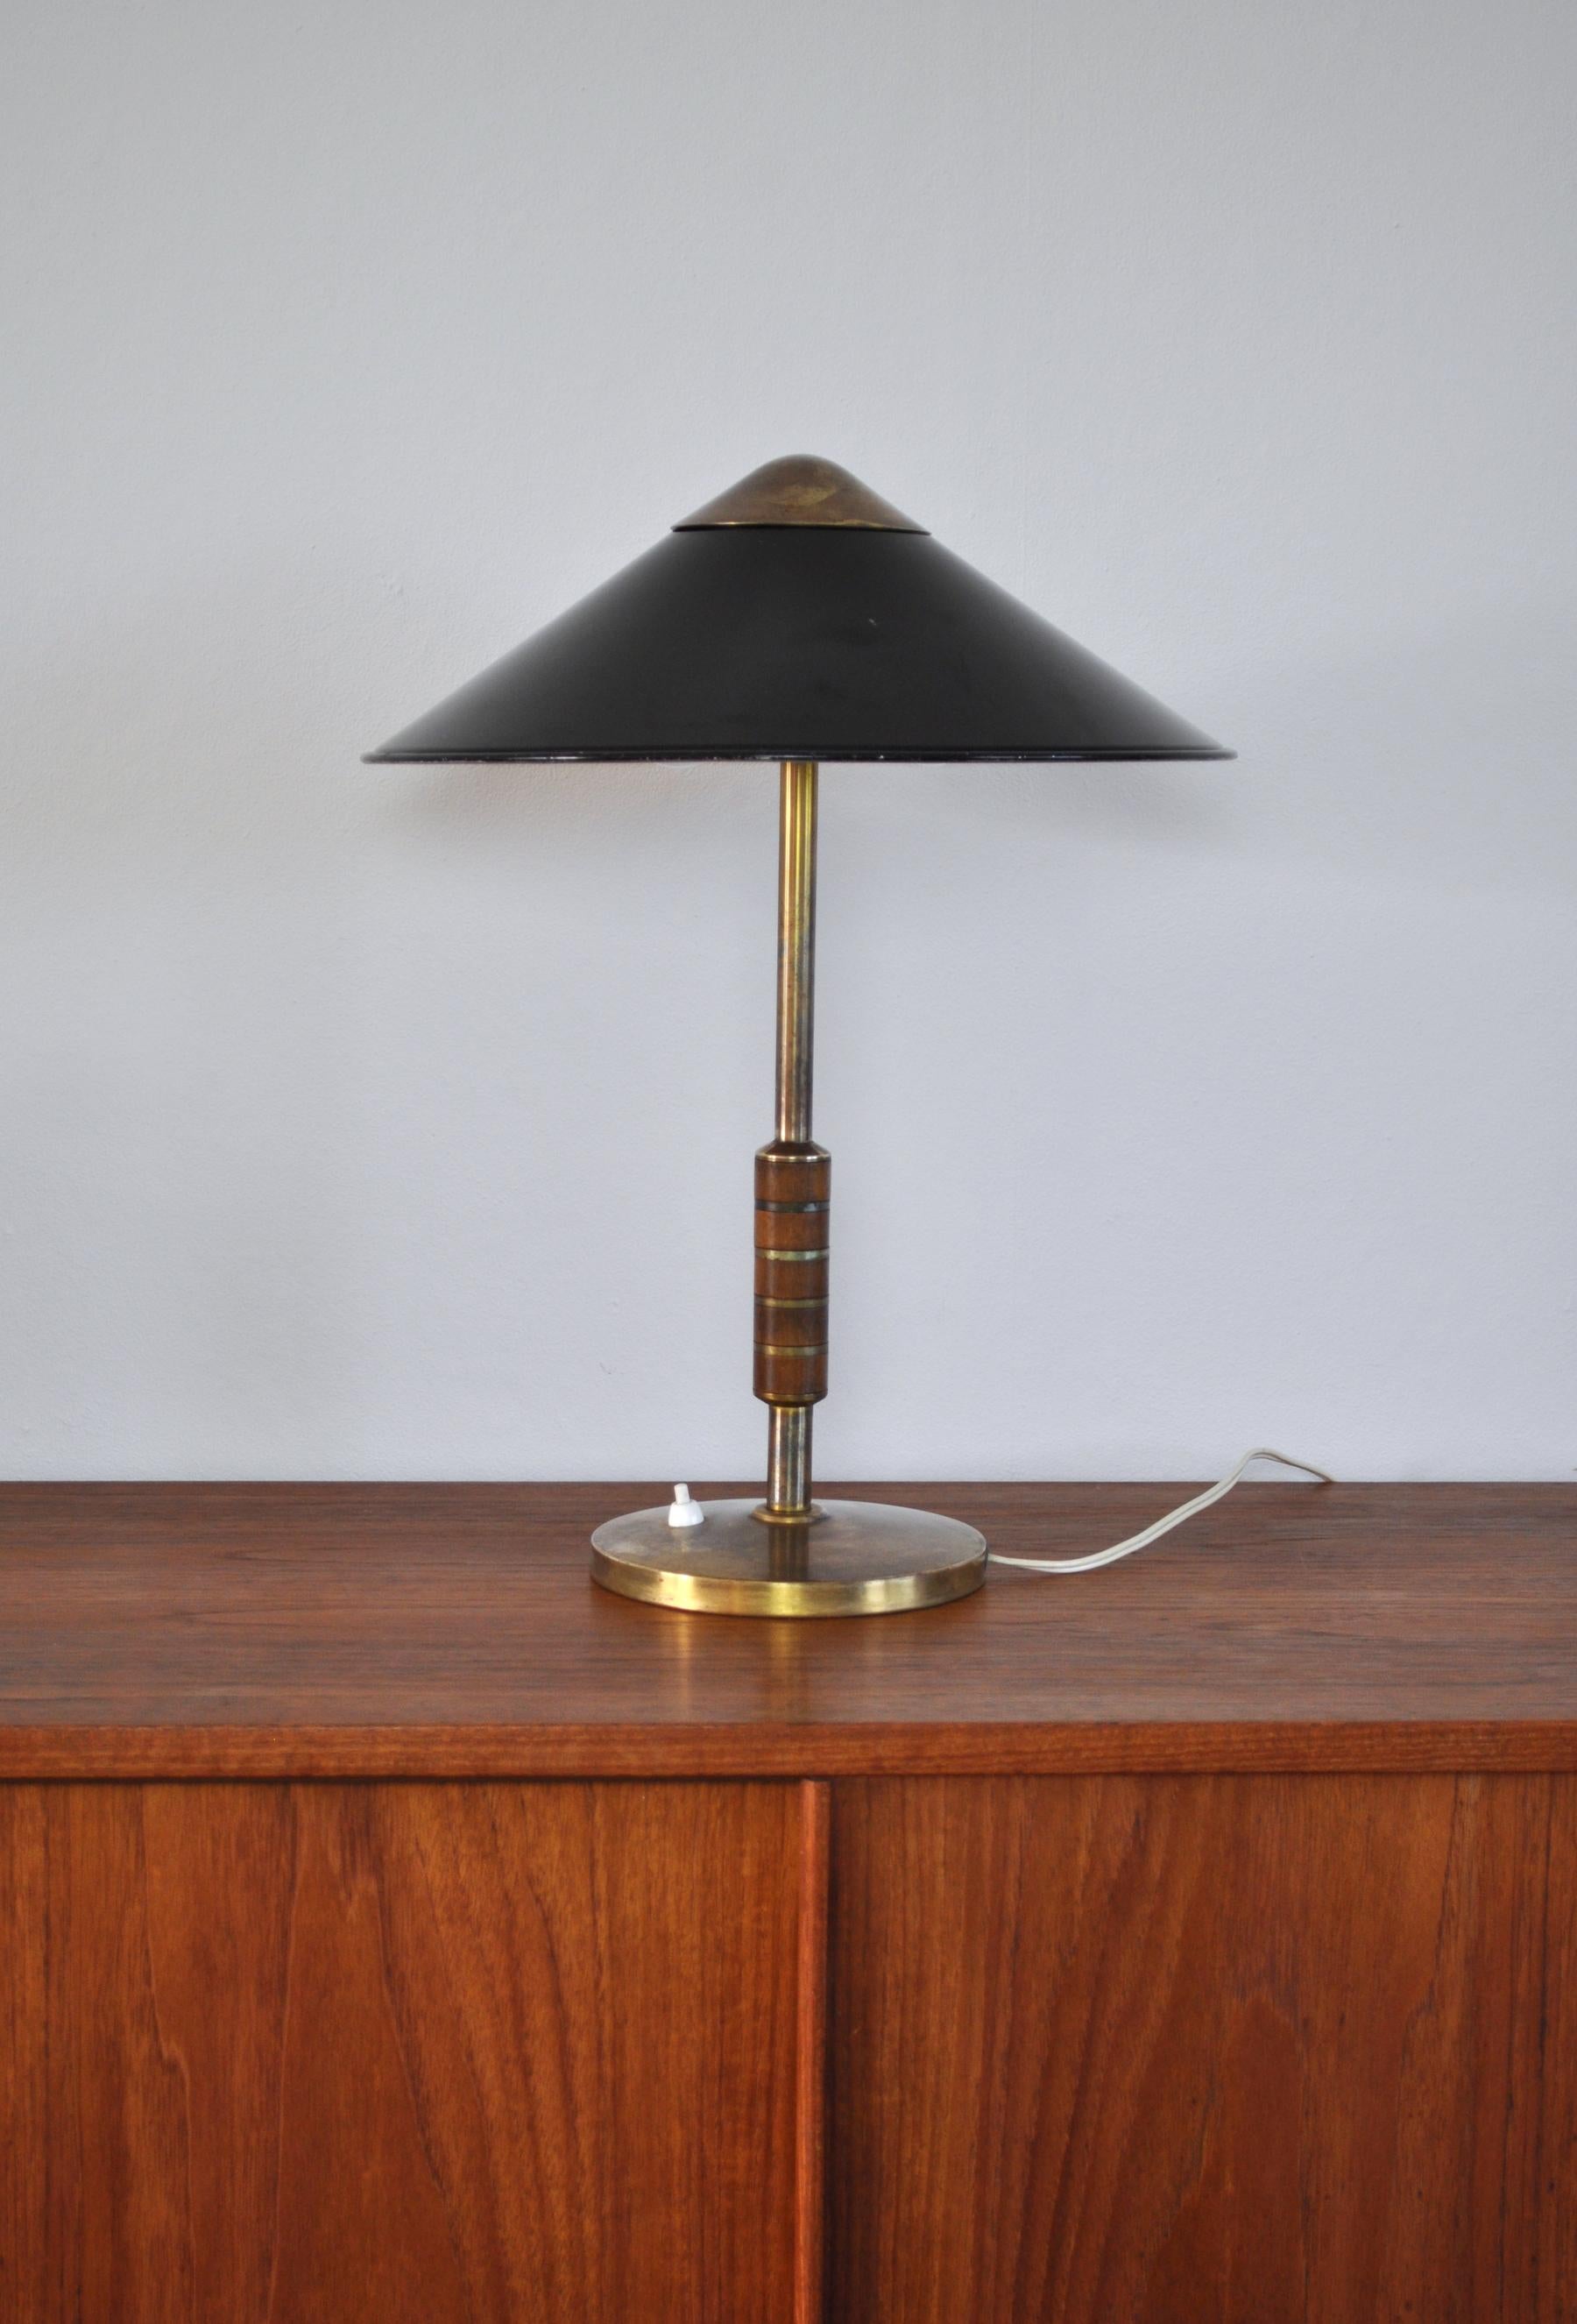 Elegant Danish brass table lamp from Lyfa designed by Bent Karlby 1956. Model B146. Solid brass with two-light sources, stem decorated with five pieces of teak. Shade black lacquered outside, white inside, top in brass. 

Untouched patinated